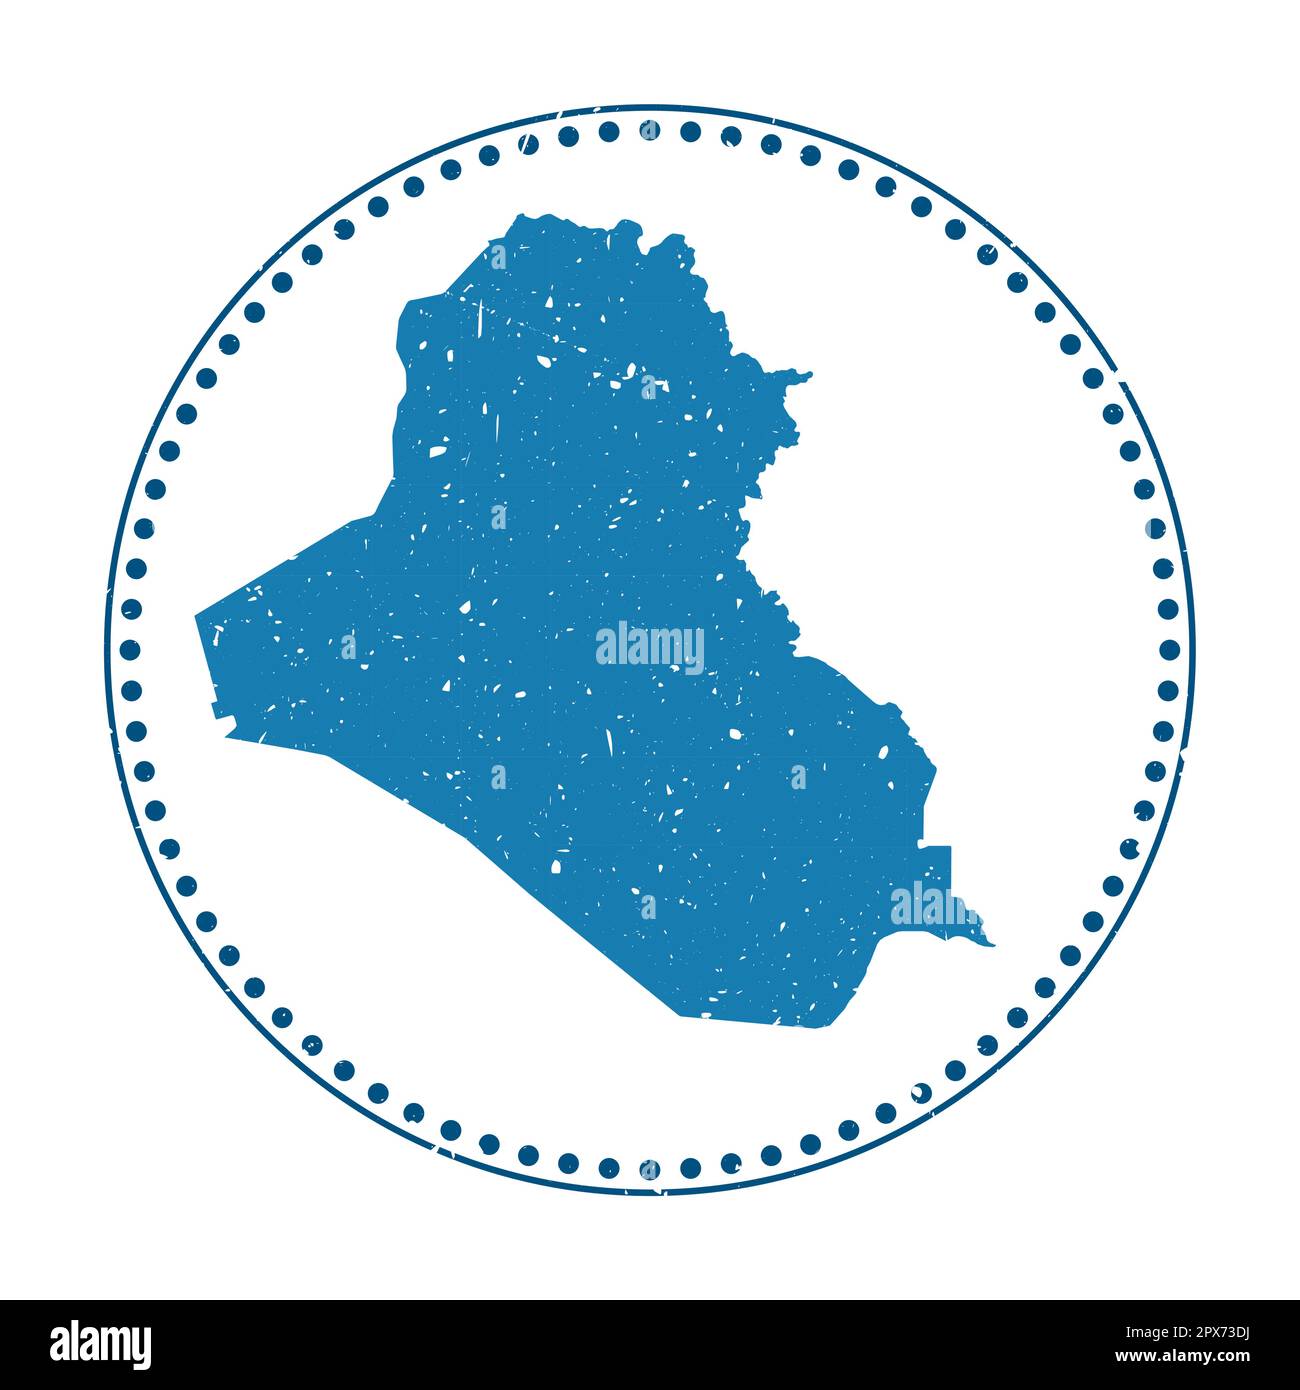 Republic of Iraq sticker. Travel rubber stamp with map of country, vector illustration. Can be used as insignia, logotype, label, sticker or badge of Stock Vector